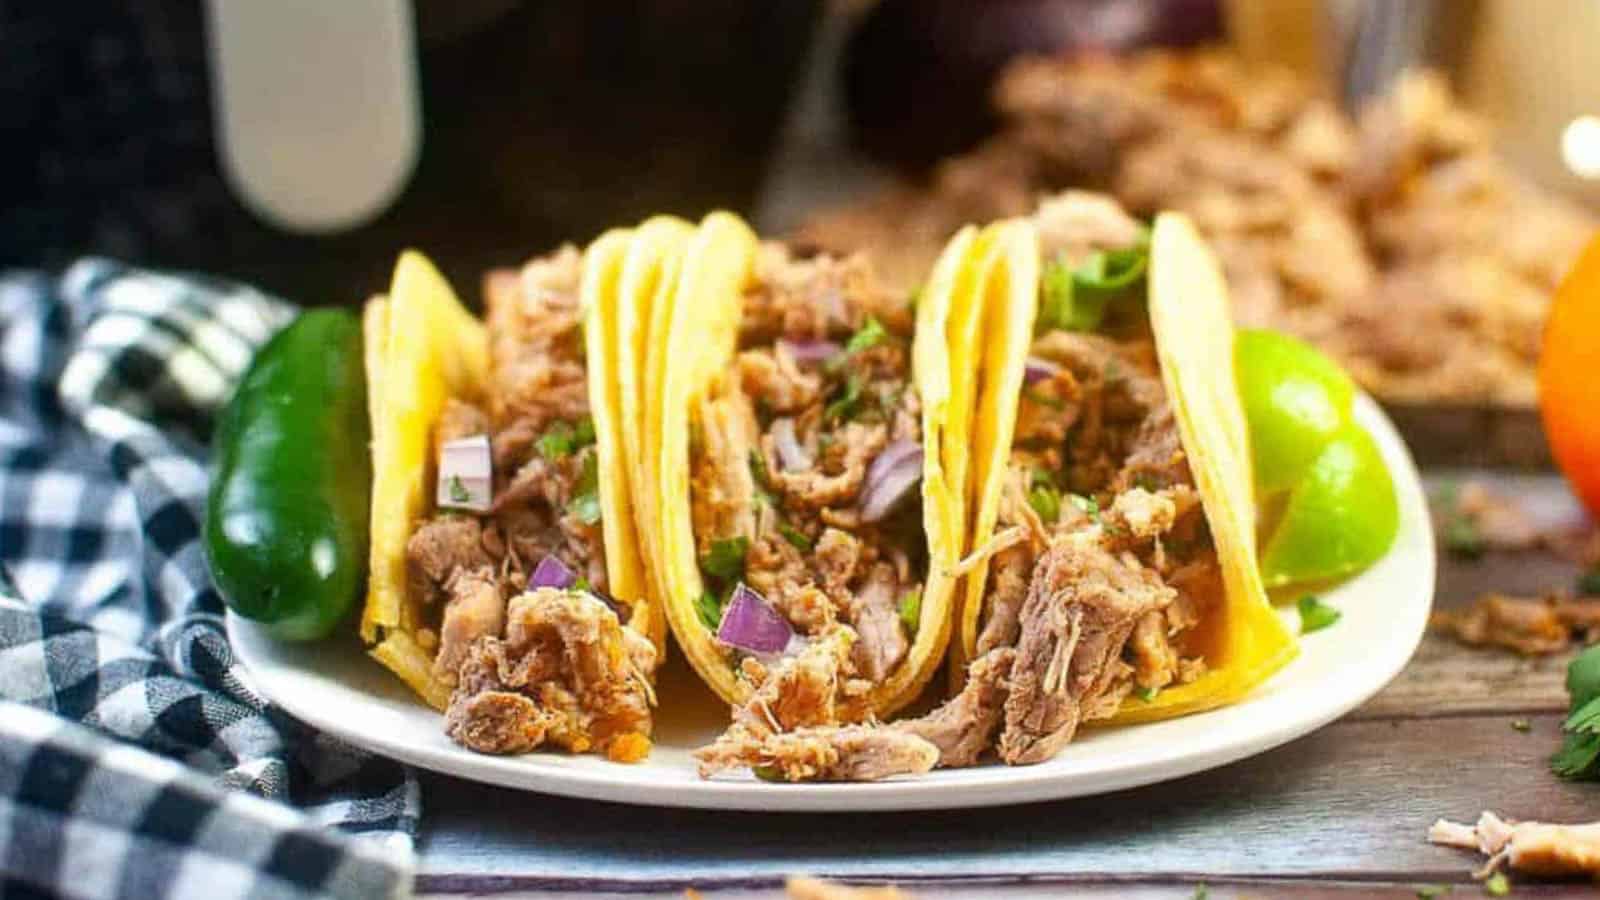 Low angle shot of 3 carnitas tacos on a white plate with lime wedges.